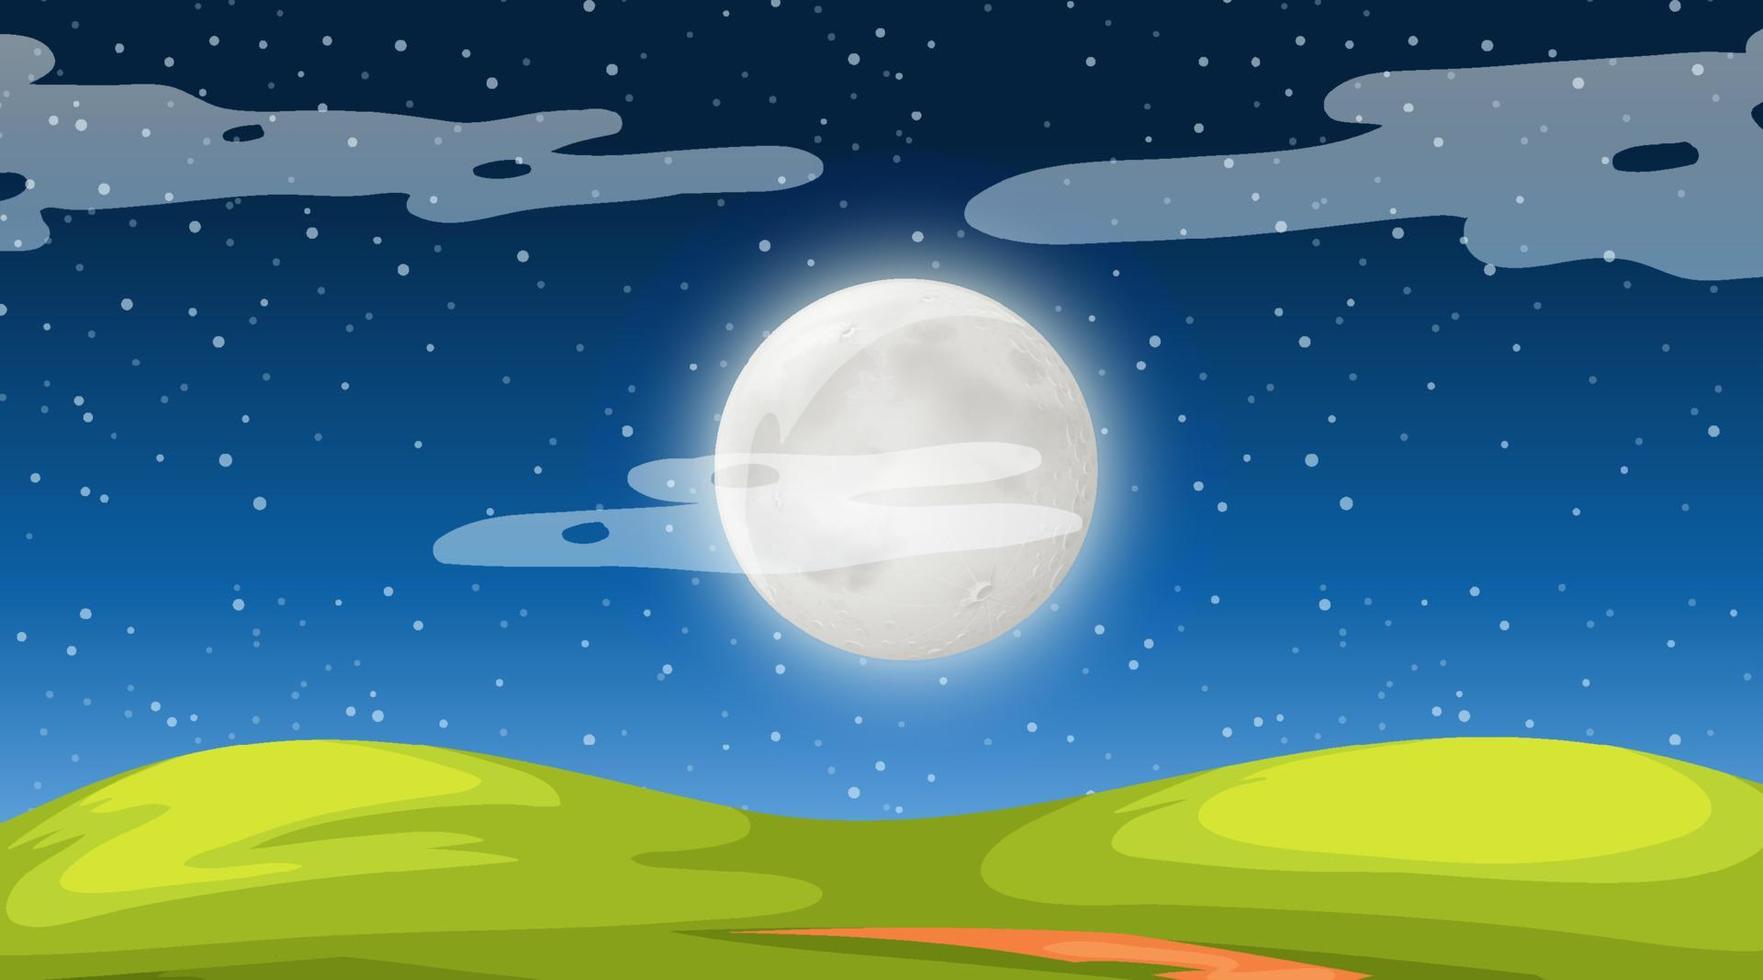 Blank meadow landscape scene at night with super moon vector